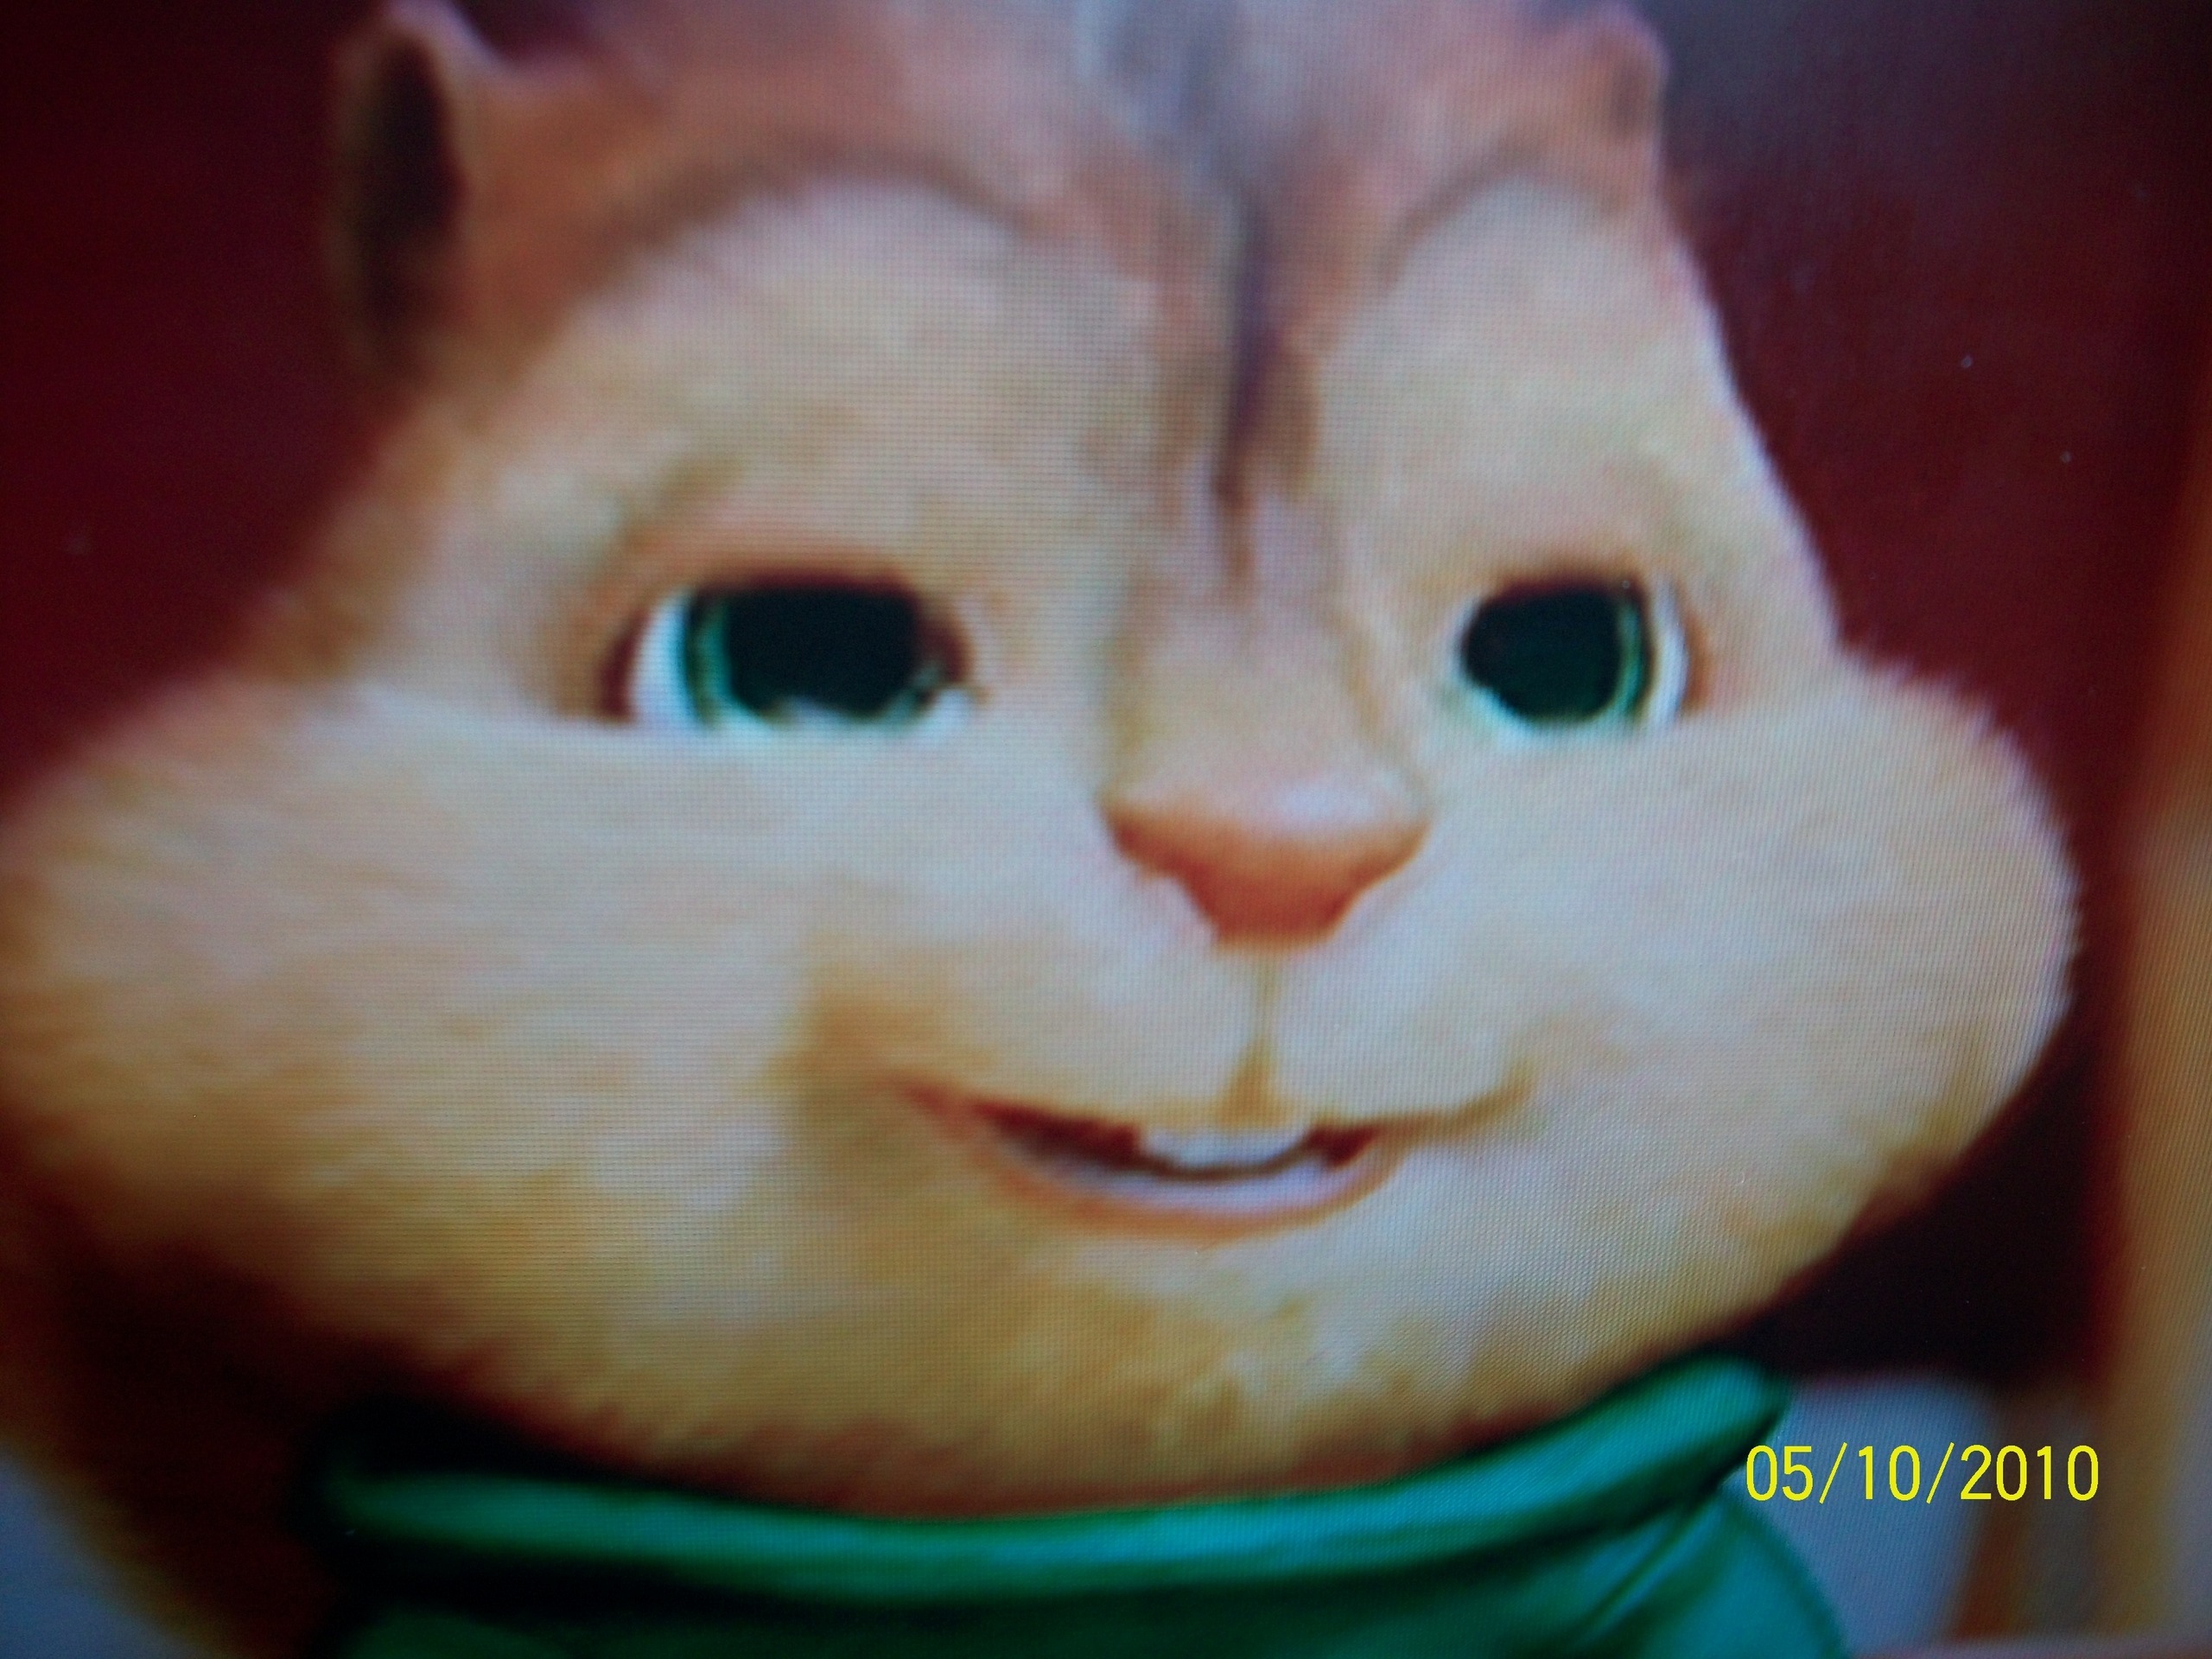 theodore - Alvin and the Chipmunks Wallpaper (20223556) - Fanpop